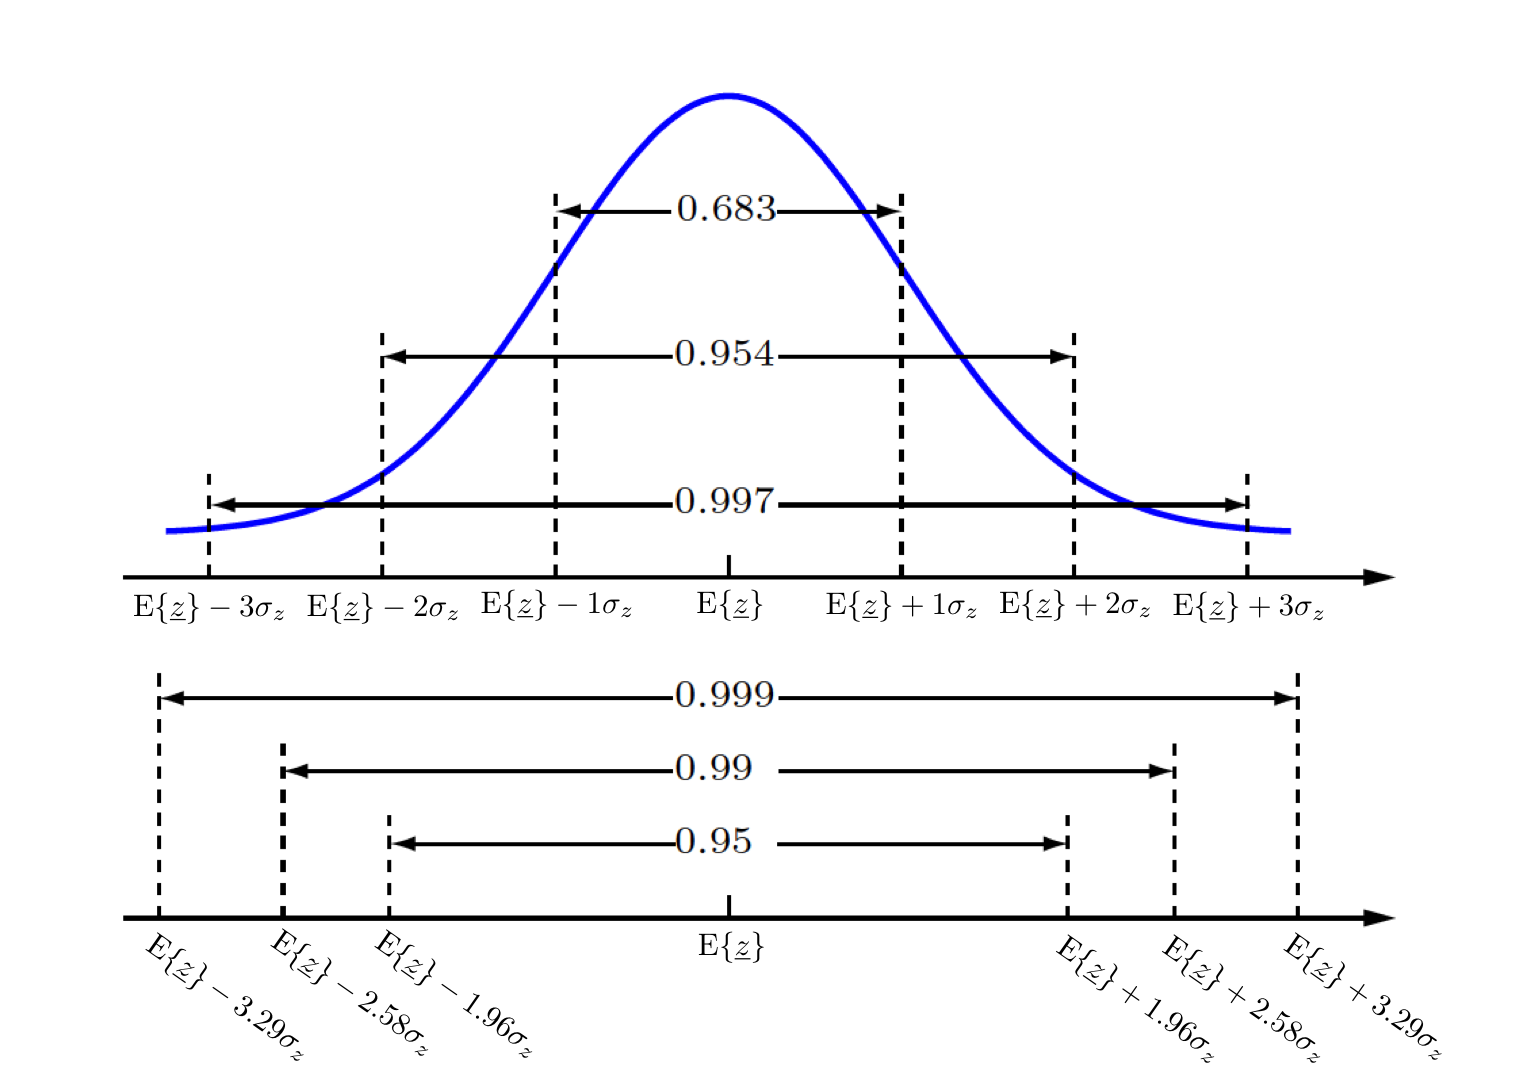 Some important probabilistic intervals for Gaussian distribution